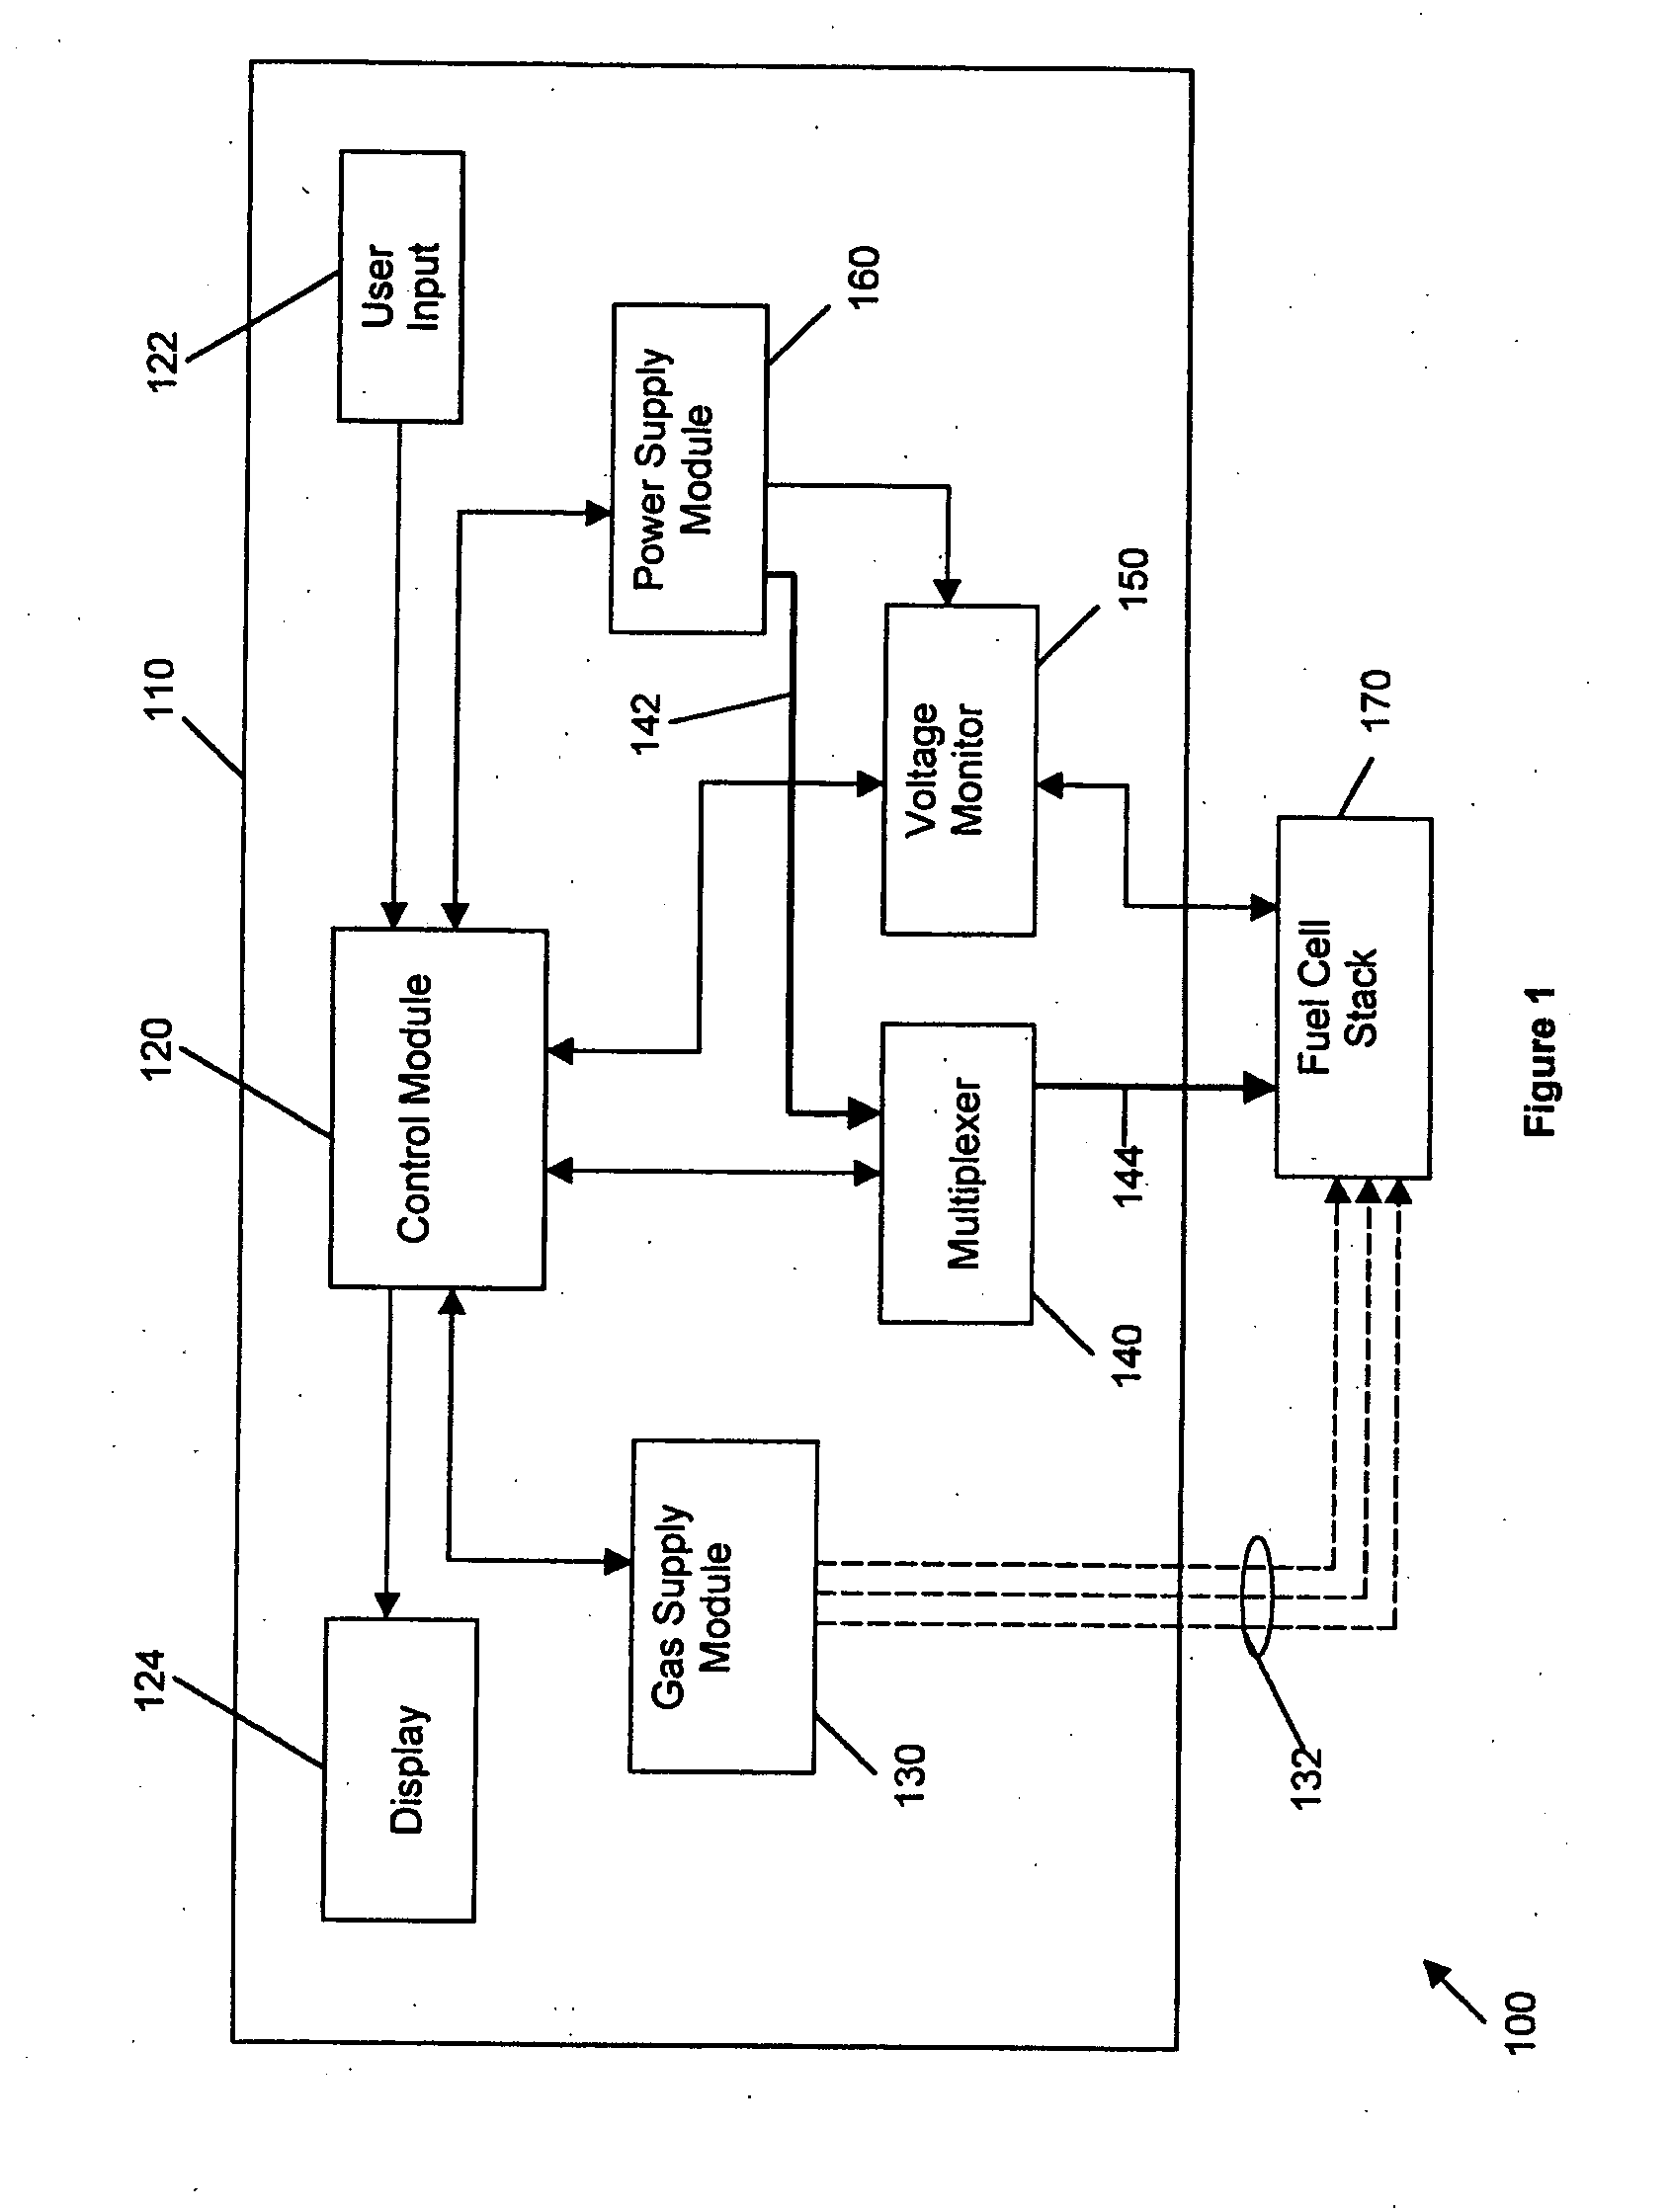 Method, system and apparatus for diagnostic testing of an electrochemical cell stack